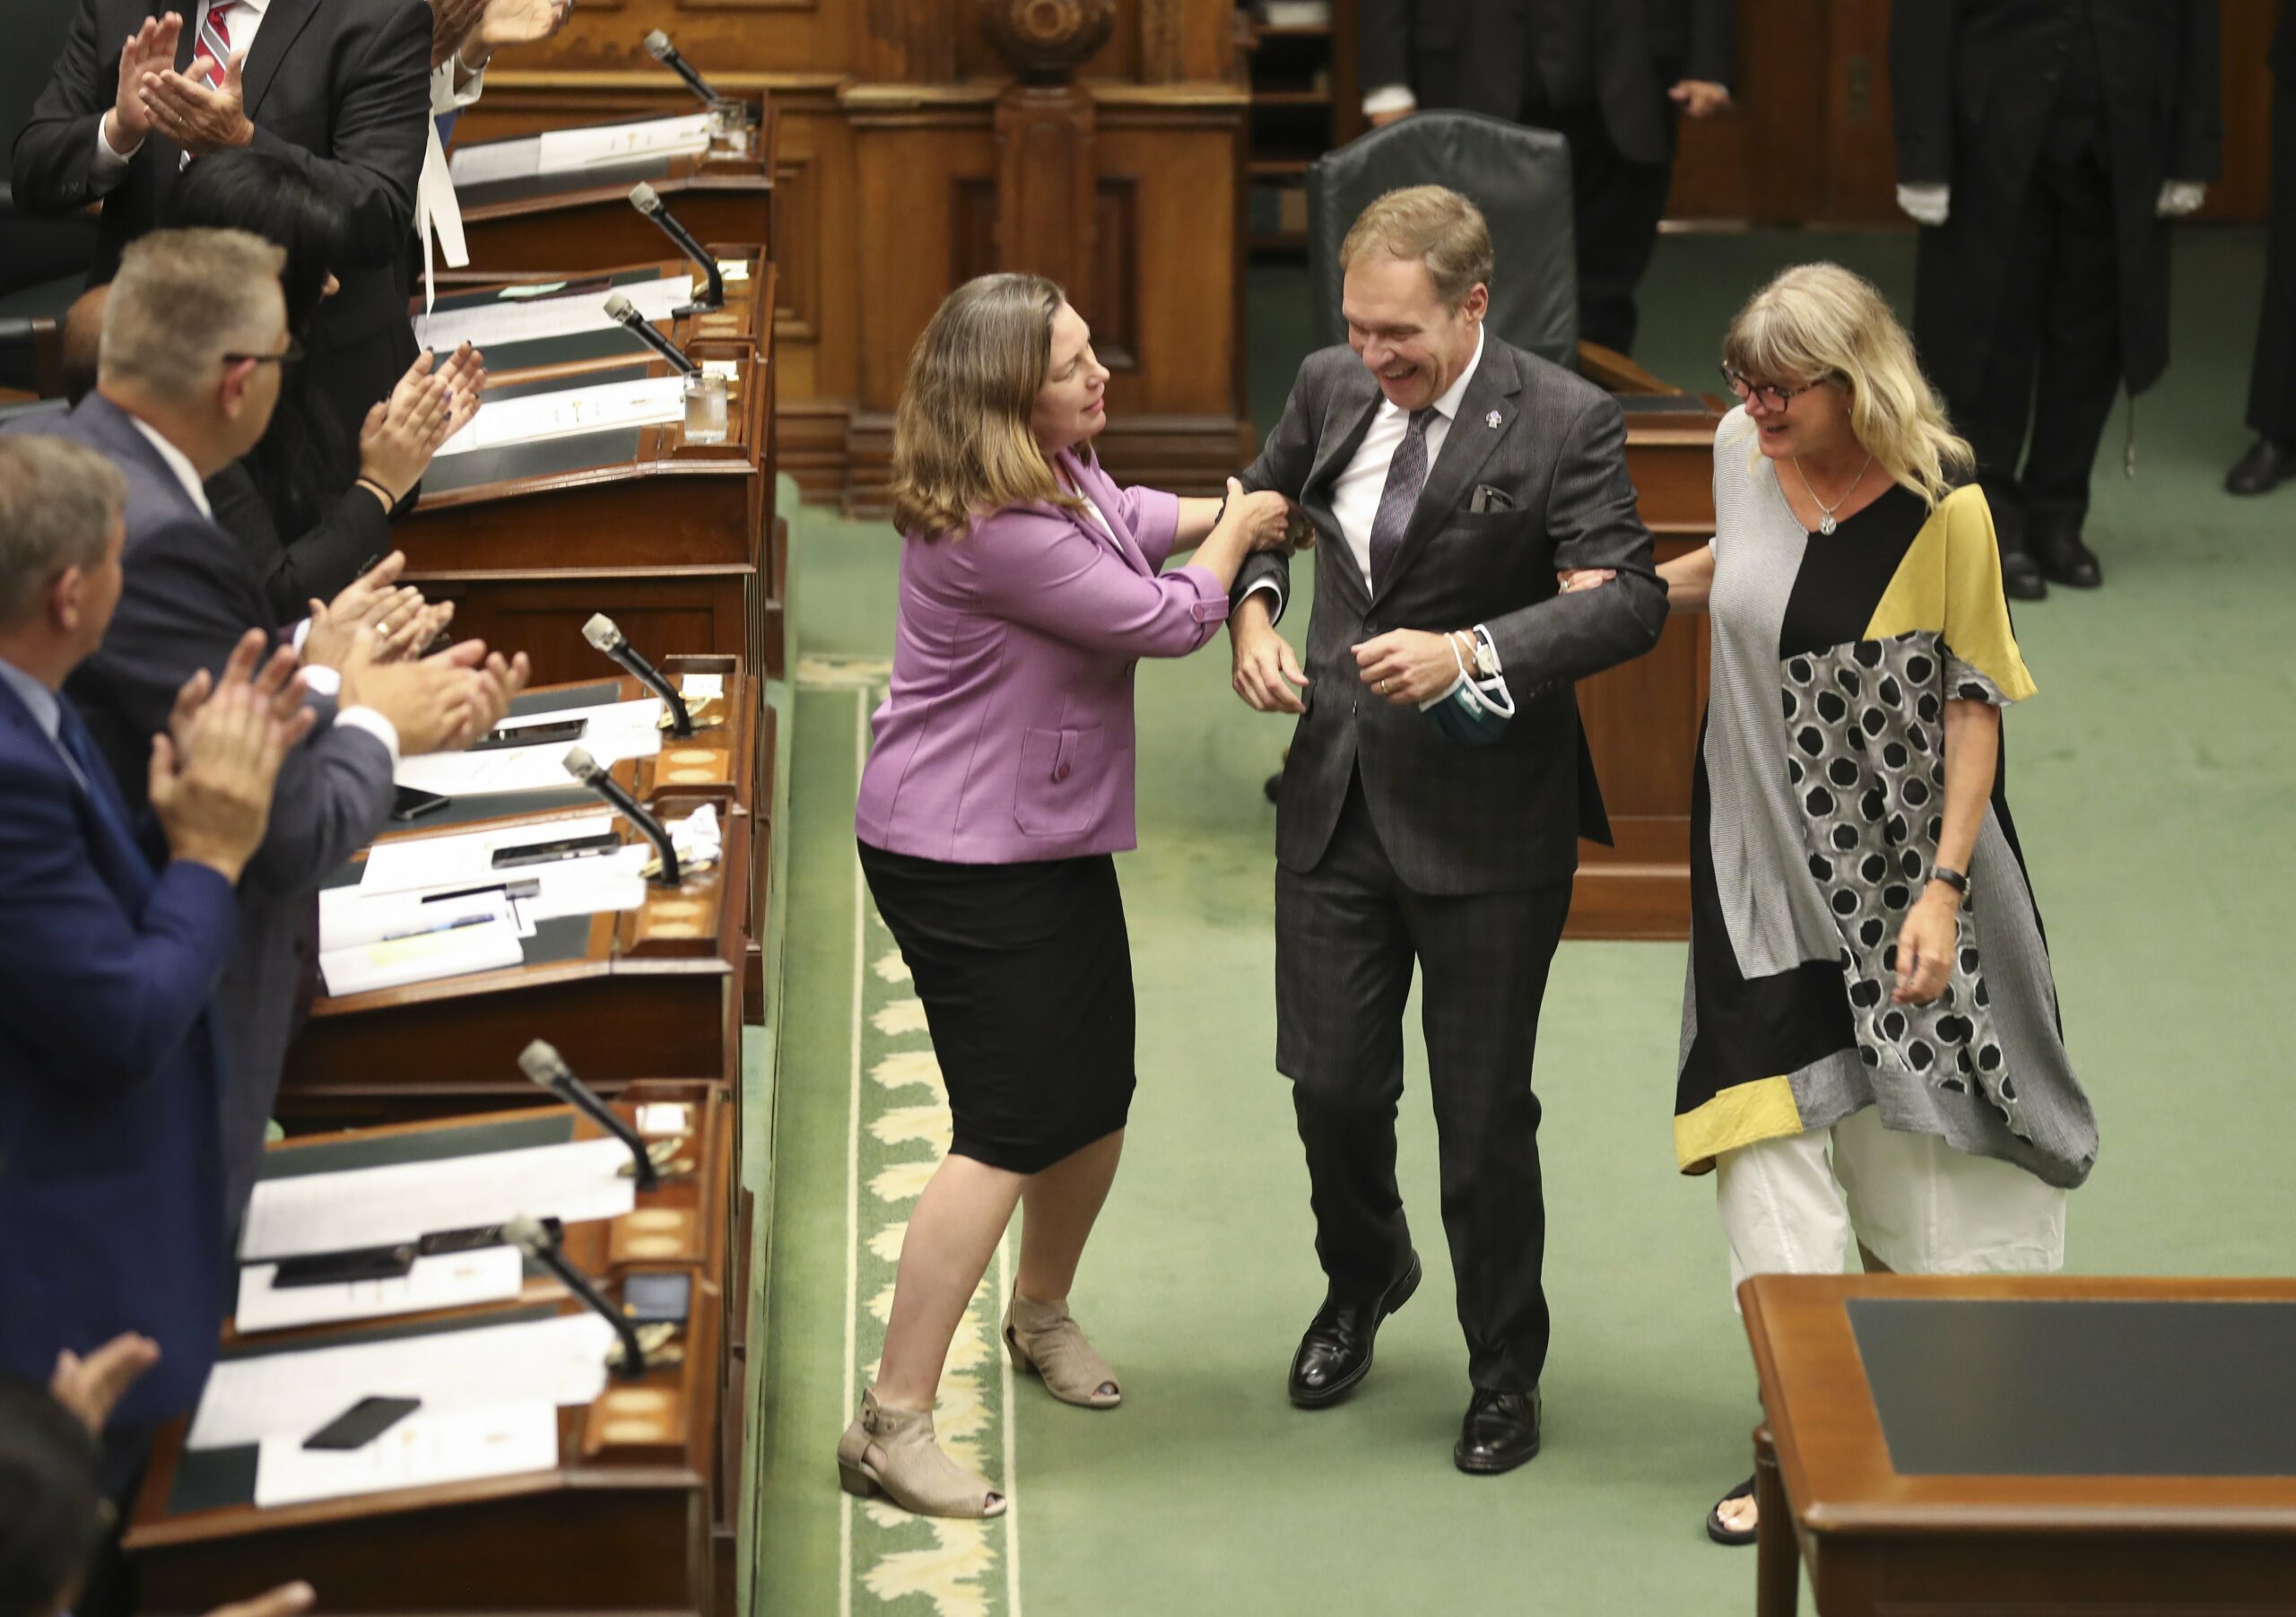 Ontario Speaker re-elected in 'surprise' upset of government pick